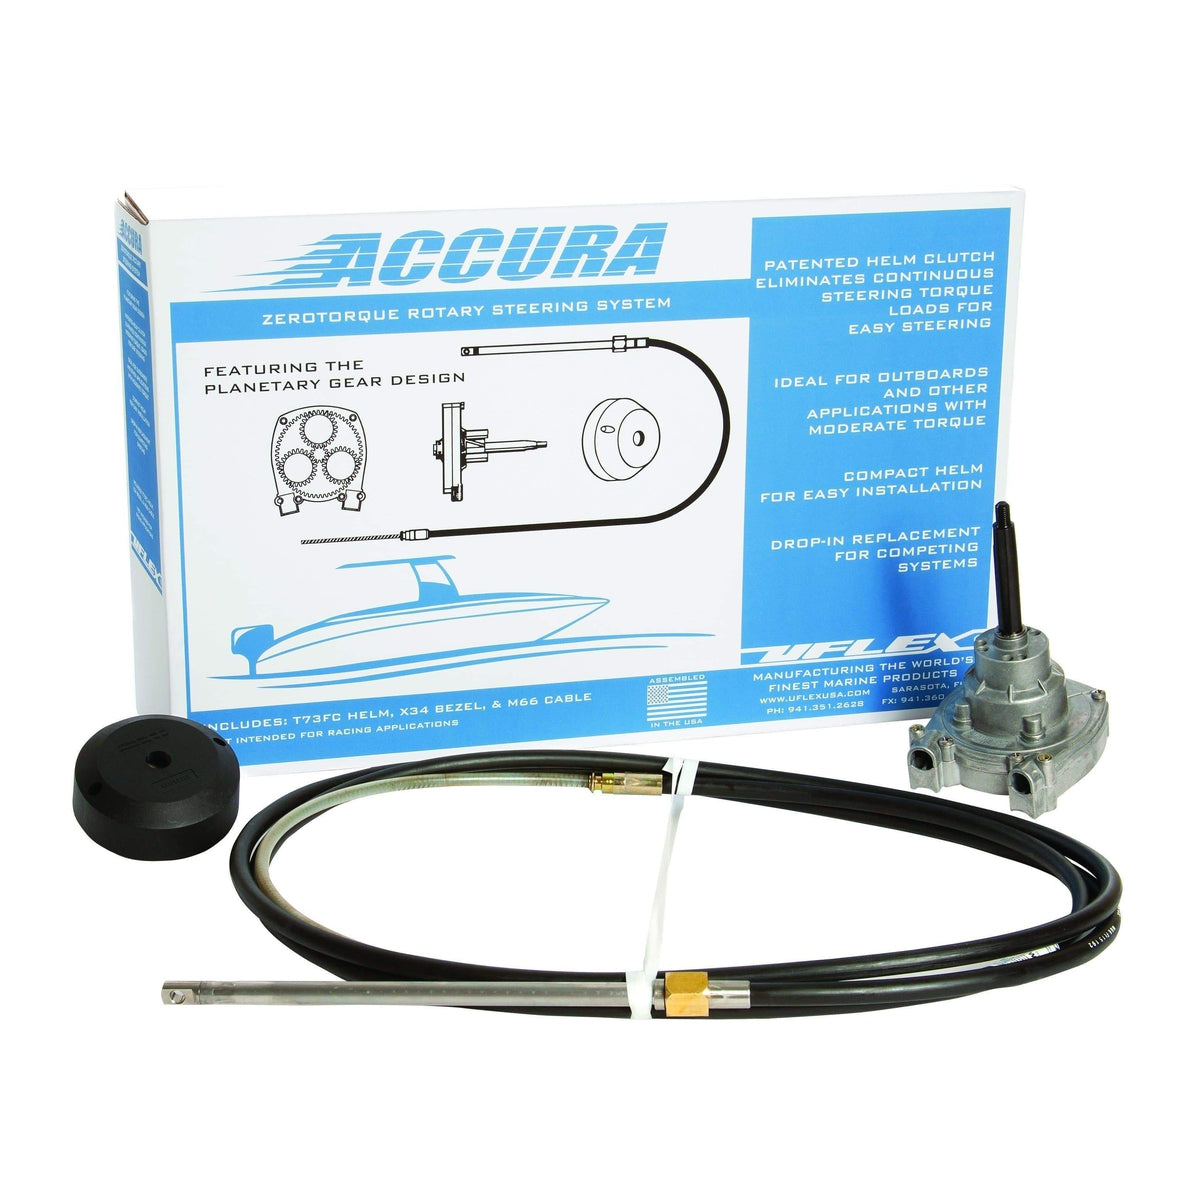 Uflex USA Qualifies for Free Shipping Uflex Rotary Steering Package 10' #ACCURA10